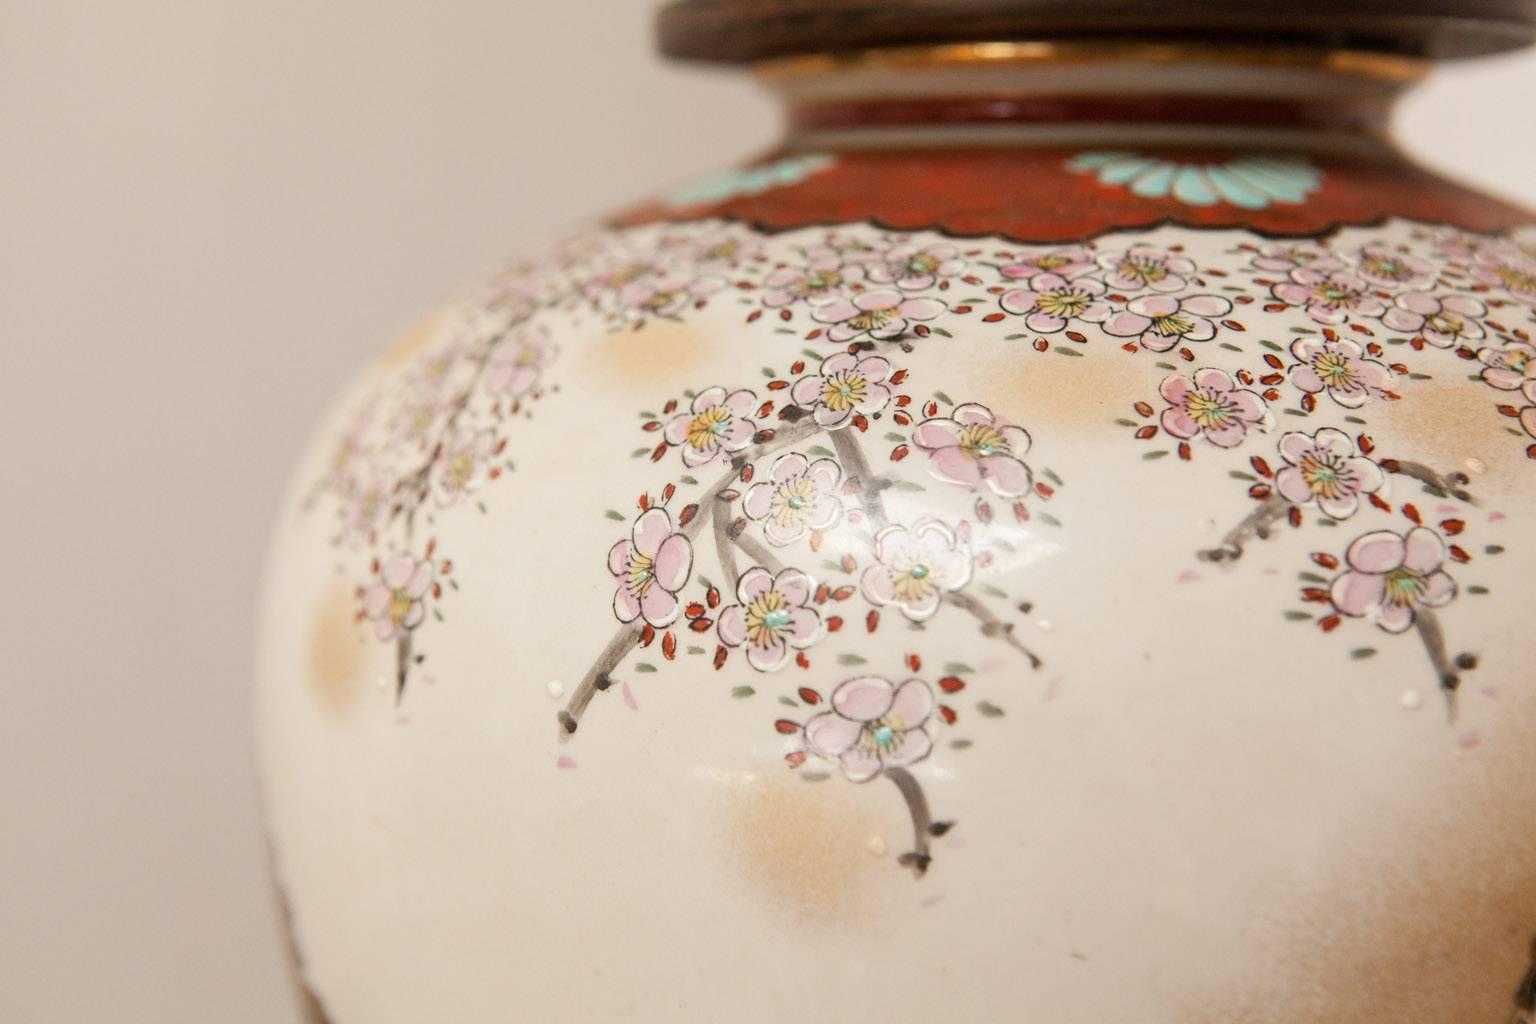 Gorgeous Japanese Satsuma style painted porcelain ginger jar converted into a table lamp with a wooden lid and set on a brass pedestal with a wood base. Produced by Frederick Cooper of Chicago. Depicts idyllic Asian social scenes with colorful